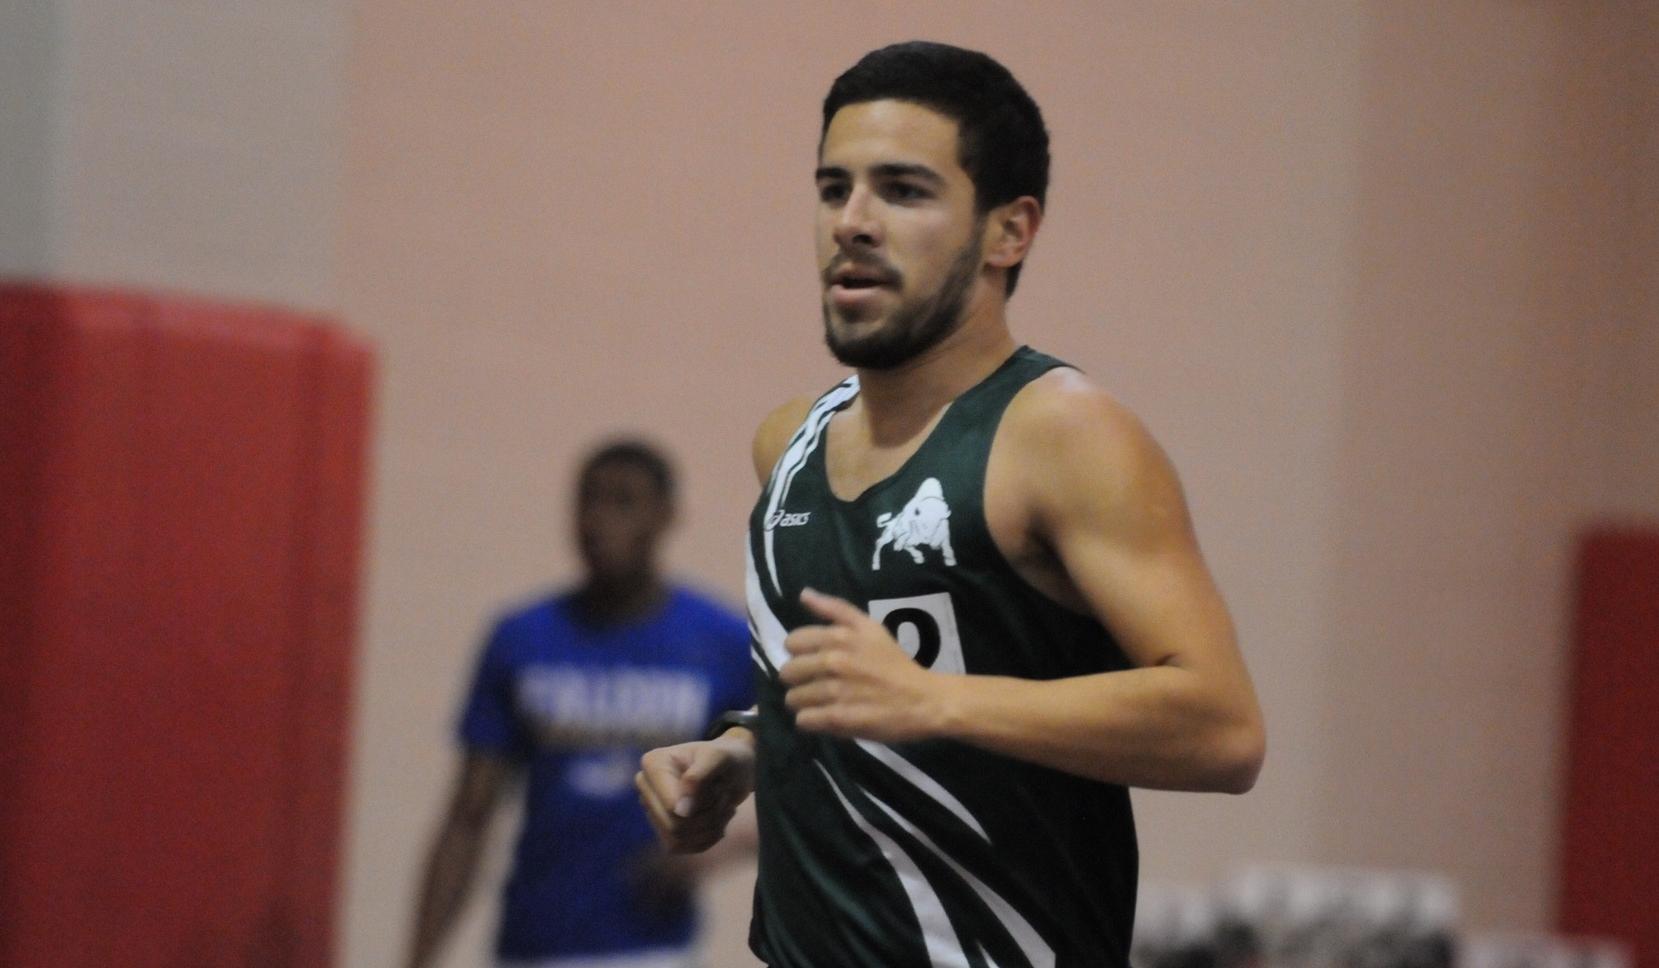 Men's 4x400 relay highlights Bison day at Mount Union